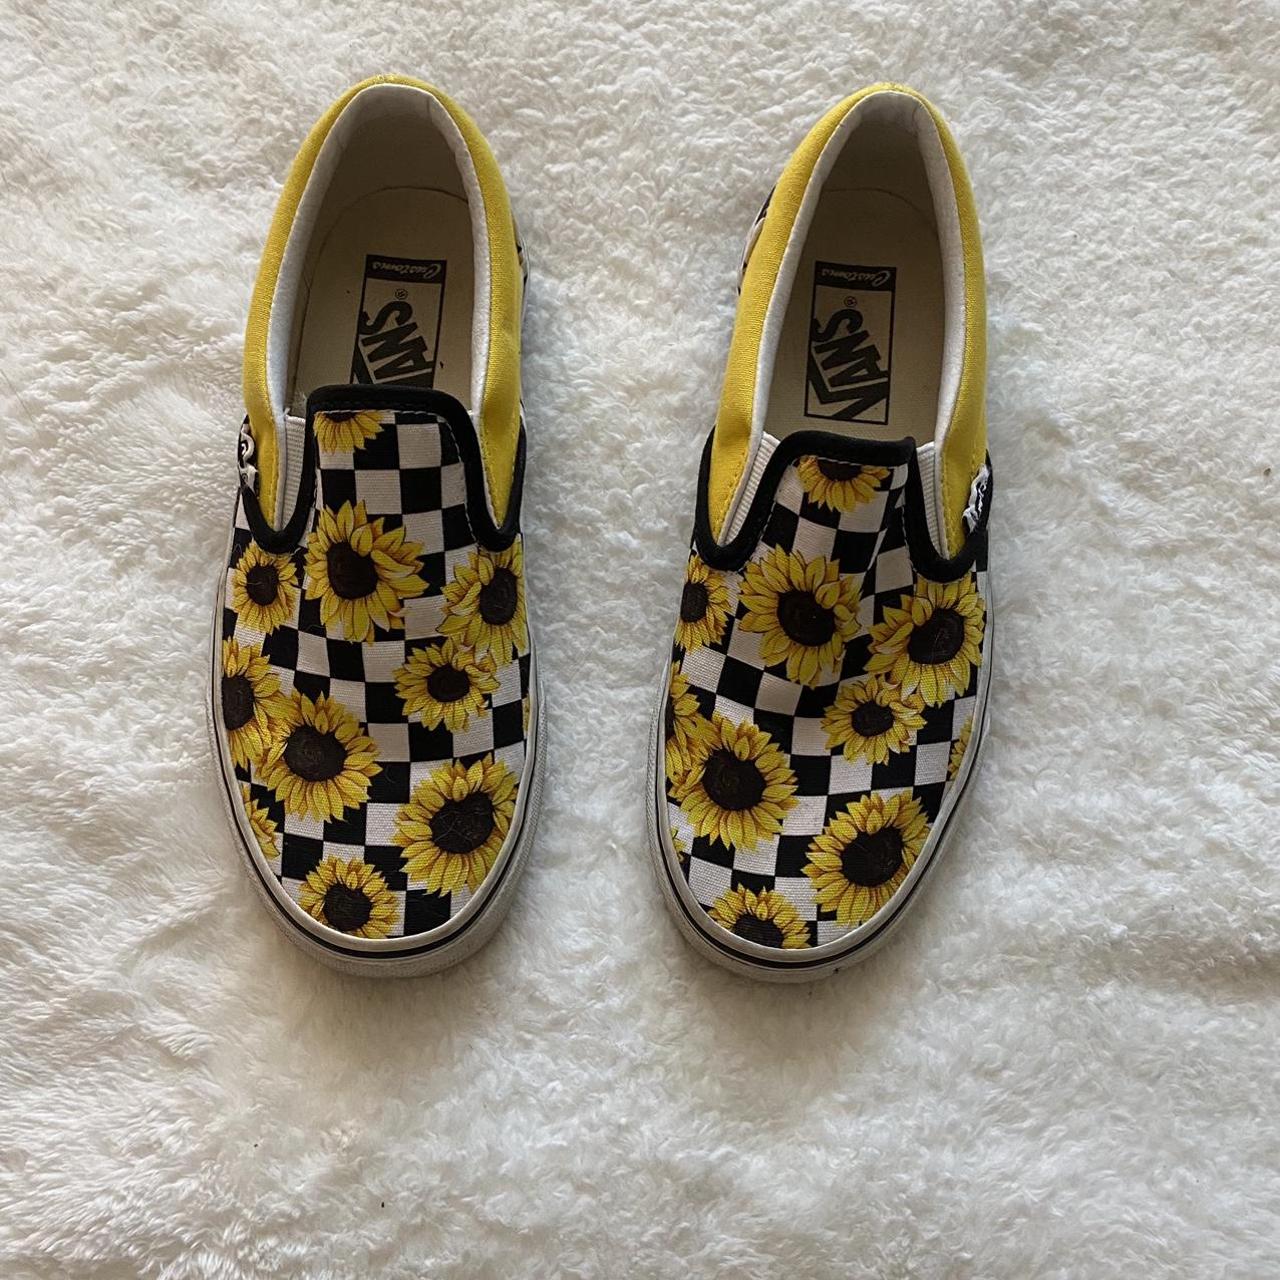 Vans checkered Sunflower Customs Available in all - Depop